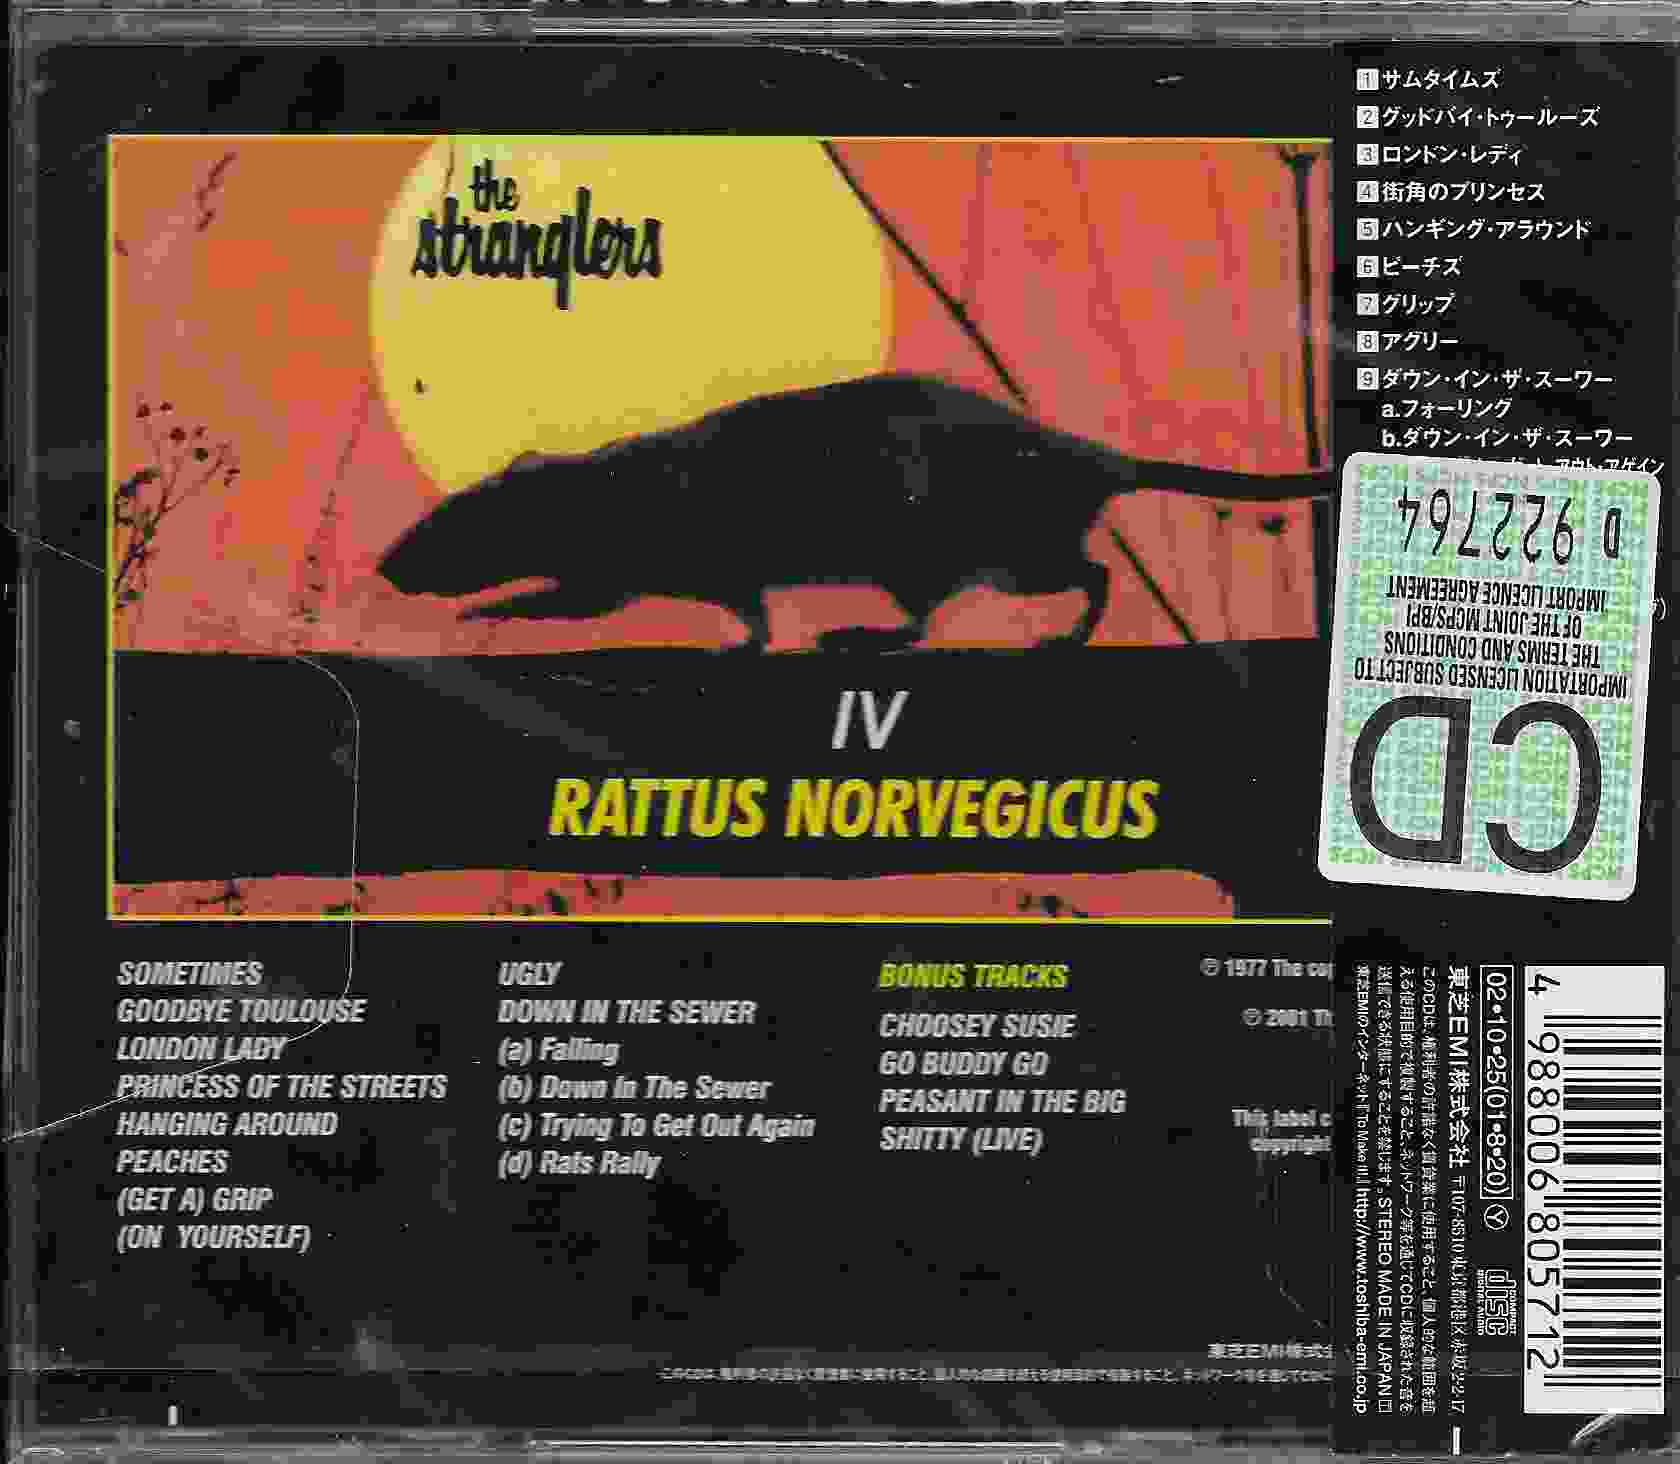 Picture of TOCP 53274 Rattus norvegicus by artist The Stranglers from The Stranglers